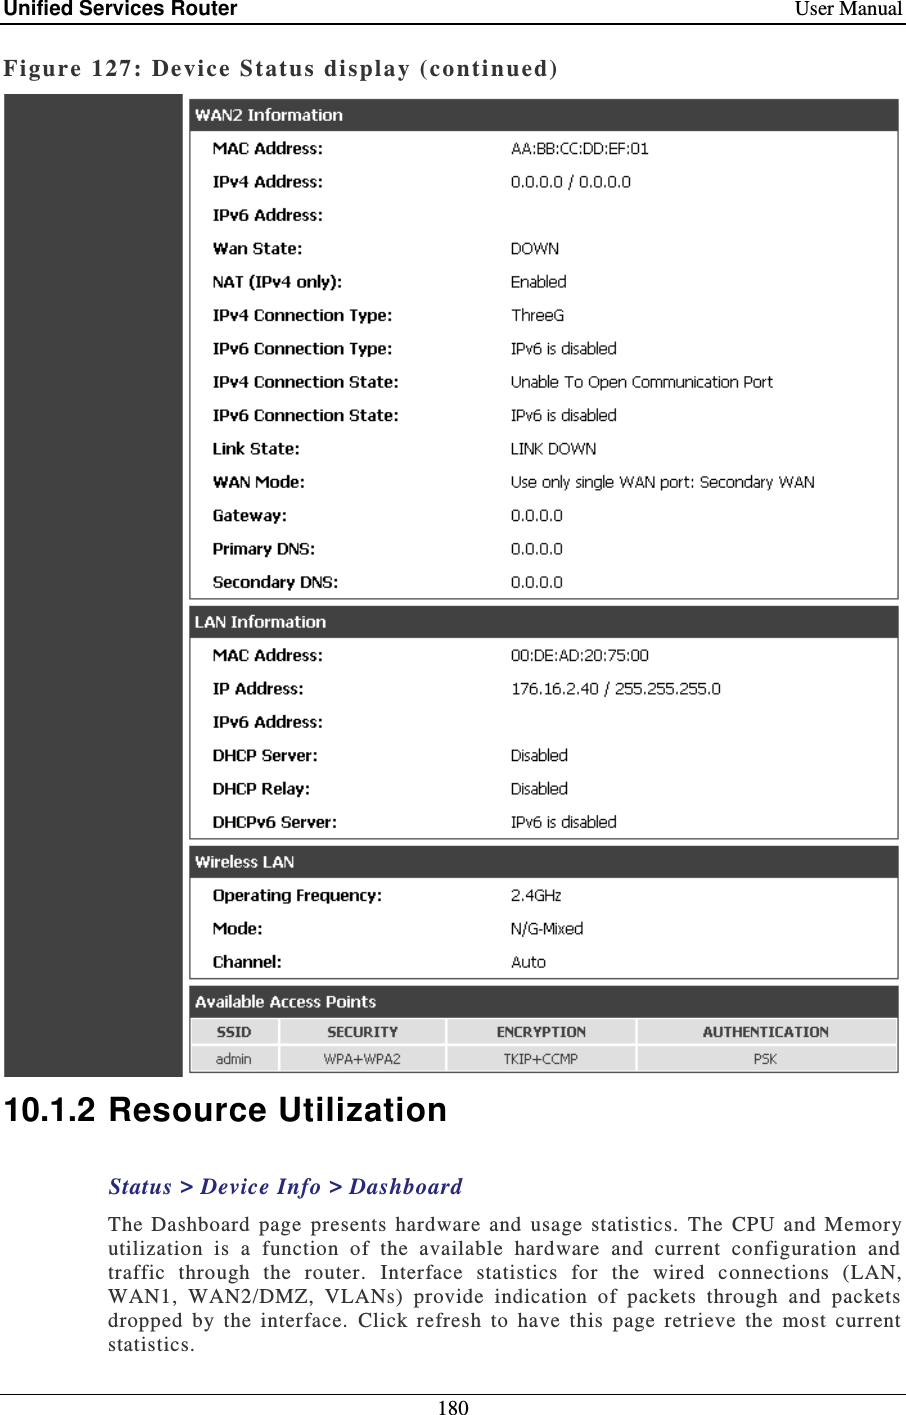 Unified Services Router    User Manual 180  Figure 127: Device Status  di splay (continued)   10.1.2 Resource Utilization Status &gt; Device Info &gt; Dashboard The  Dashboard  page  presents  hardware  and  usage  statistics.  The  CPU  and  Memory utilization  is  a  function  of  the  available  hardware  and  current  configuration  and traffic  through  the  router.  Interface  statistics  for  the  wired  connections  (LAN, WAN1,  WAN2/DMZ,  VLANs)  provide  indication  of  packets  through  and  packets dropped  by  the  interface.  Click  refresh  to  have  this  page  retrieve  the  most  current statistics.  